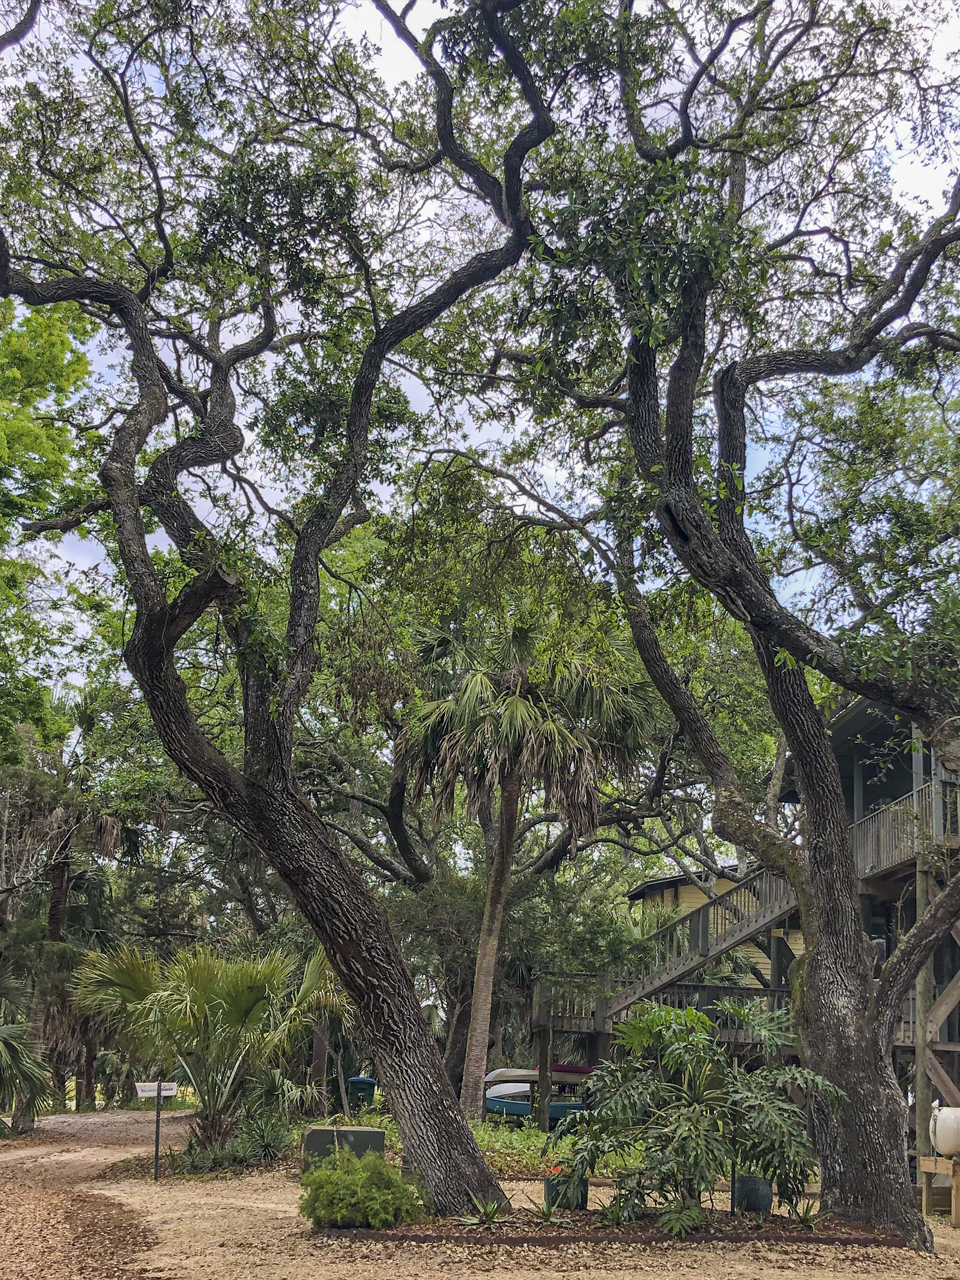 These sand live oaks have grown in a grove configuration and have naturally grown in the direction where each of them can access the most sunlight. Note the curvature of the trunk as it leans out, and then grows more upright.